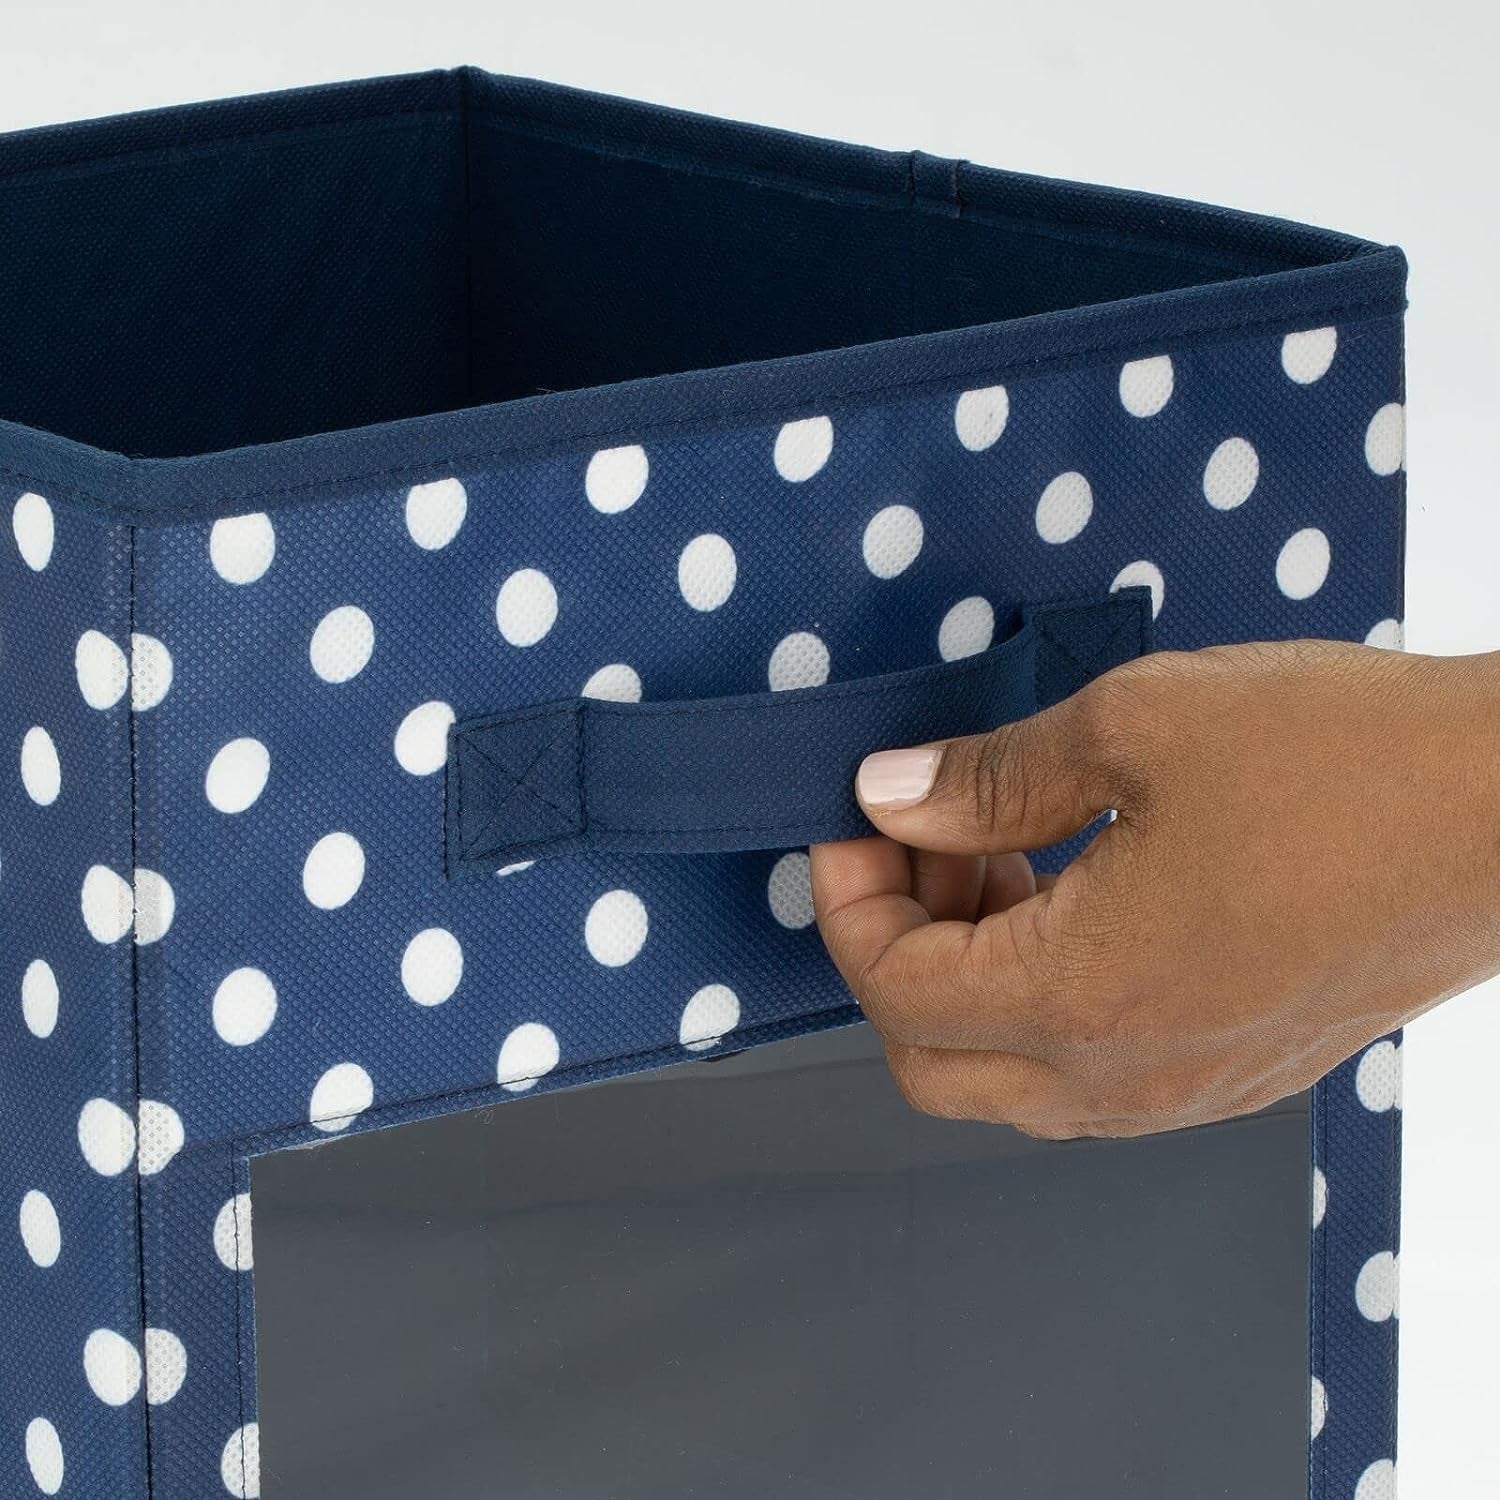 Mdesign Fabric Nursery/Playroom Closet Storage Organizer Bin Box, Front Handle/Window for Cube Furniture Shelving Unit, Hold Toys, Clothes, Diapers, Bibs, 4 Pack, Navy Blue/White Polka Dot